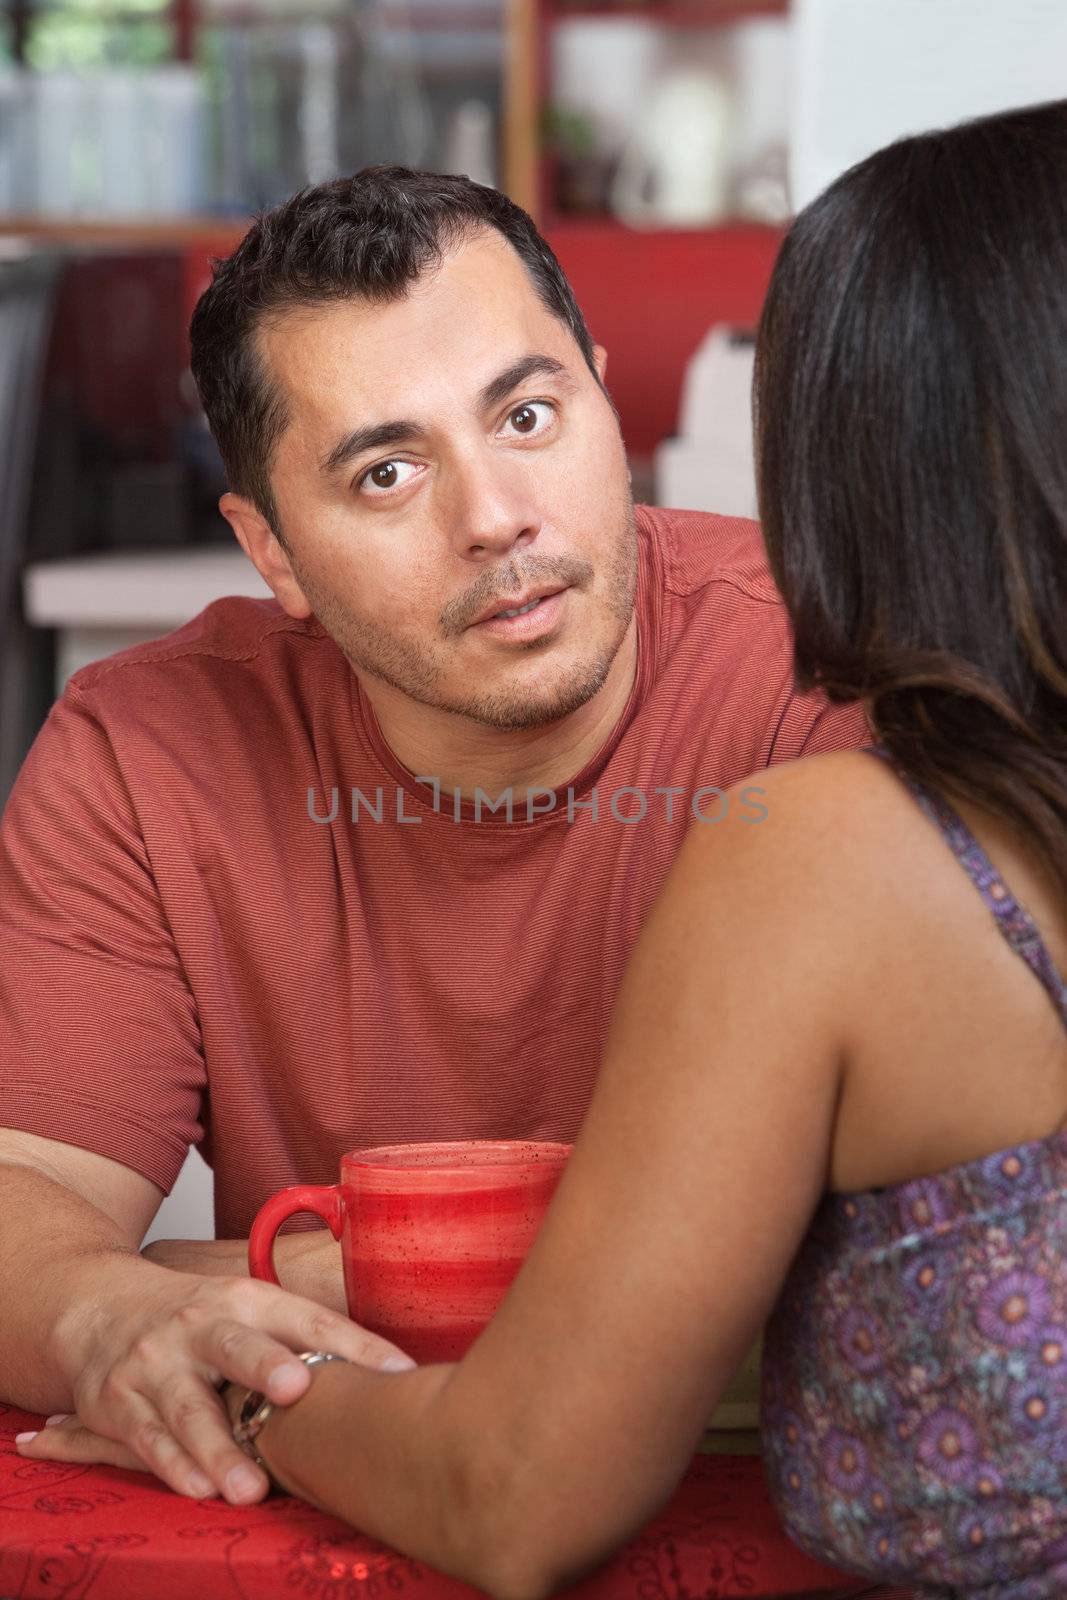 Hispanic man comforting female and holding her hand in cafe